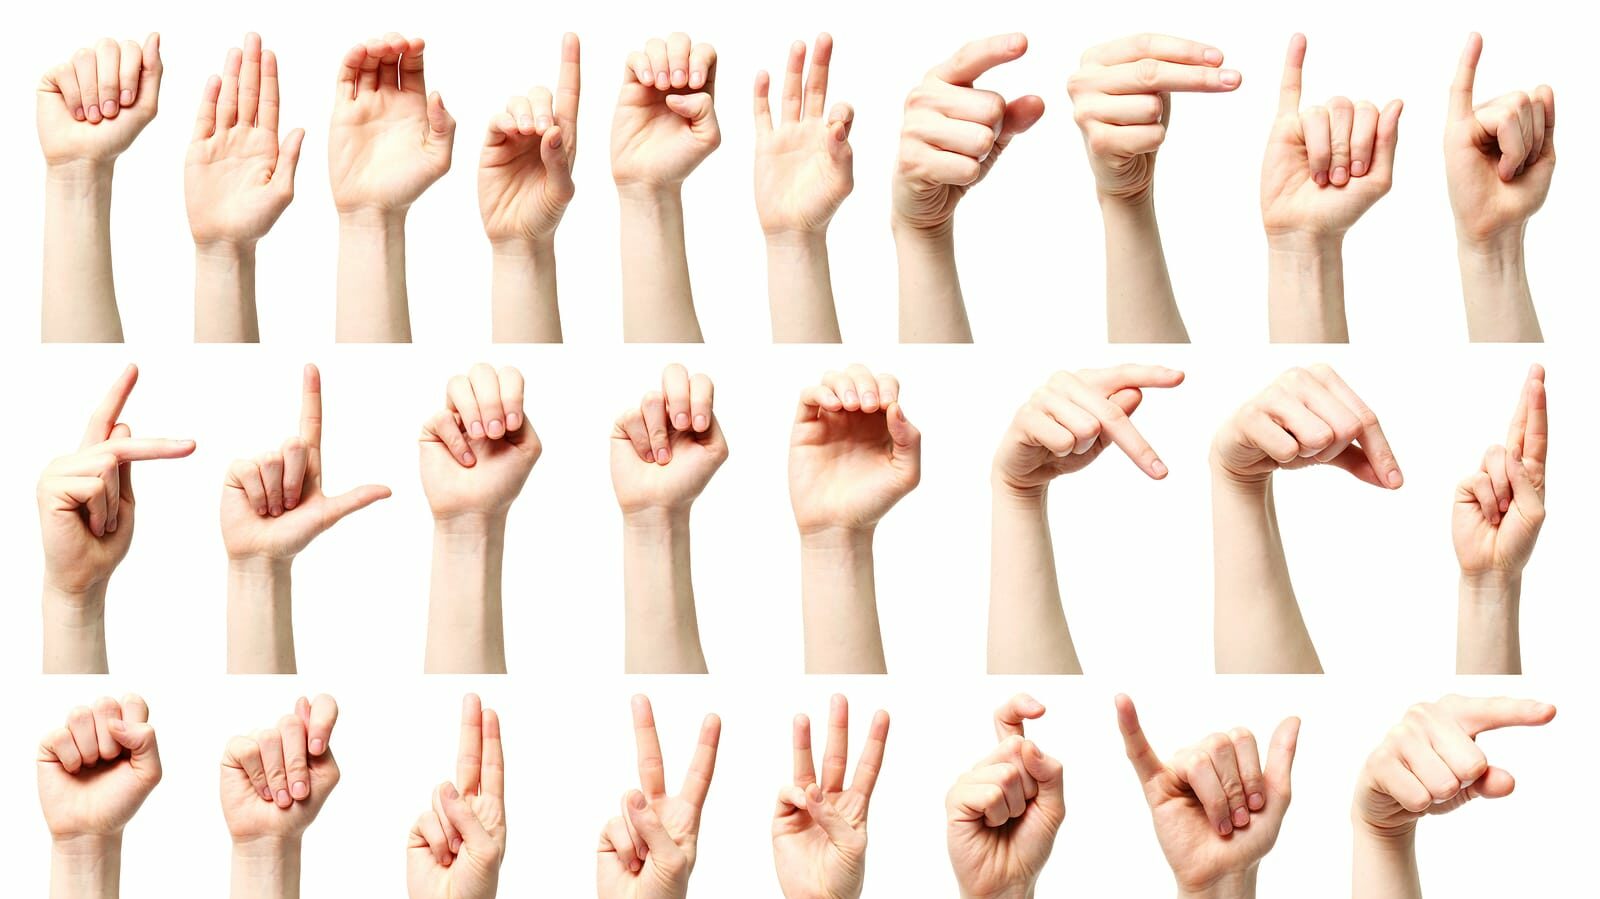 Sign language - a collage of the American sign language alphabet presented by a Caucasian young female hand.